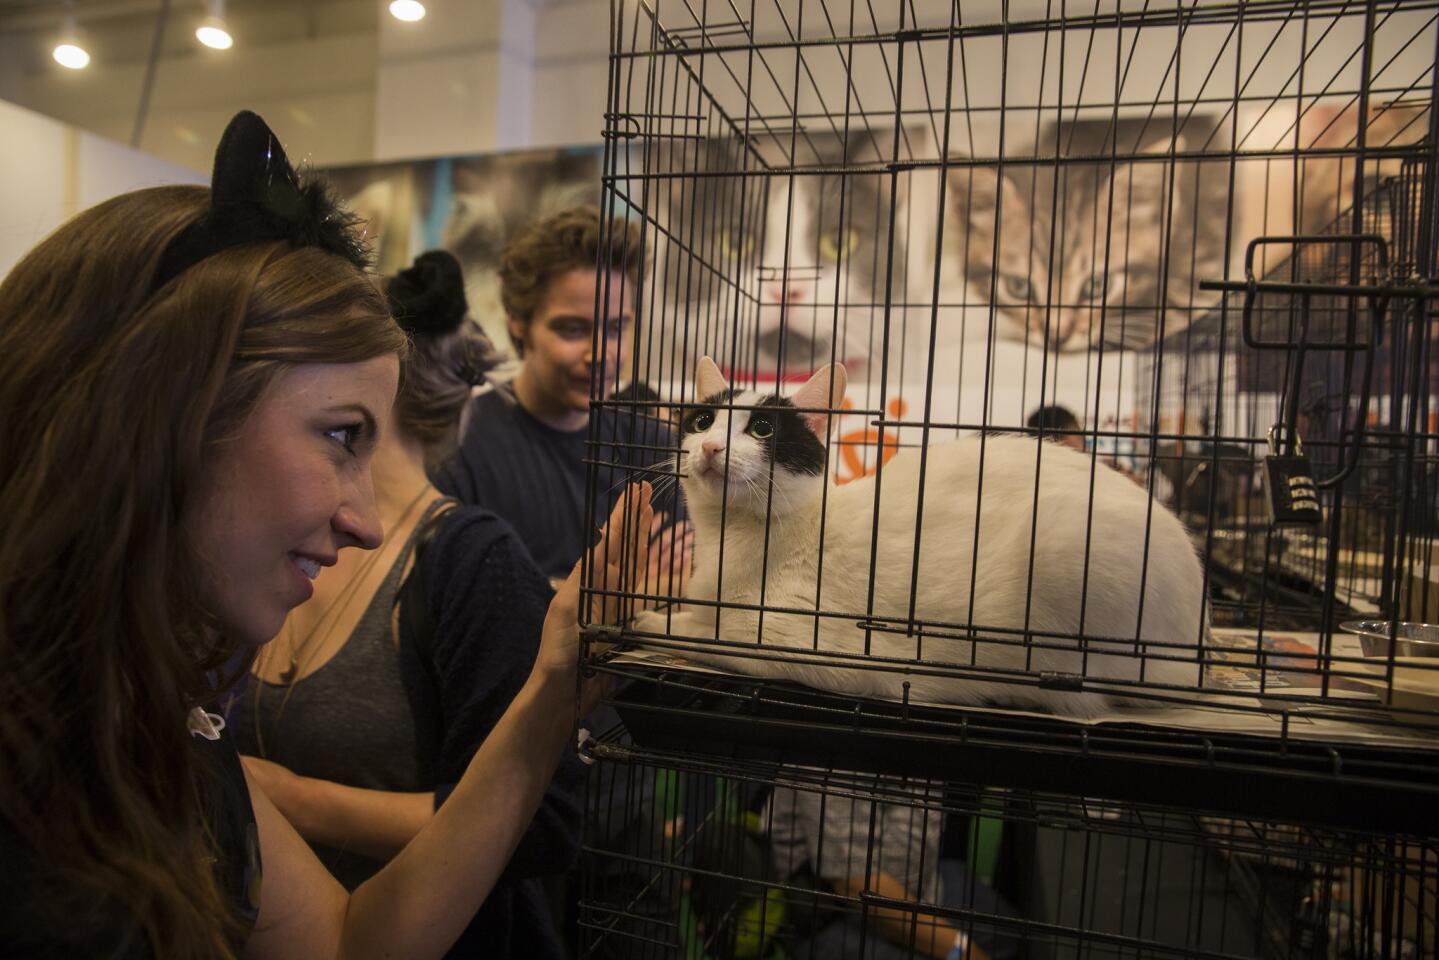 Ashley Turnham of Anaheim wears a cat ears headband and plays with a cat awaiting adoption at CatConLA on Saturday.